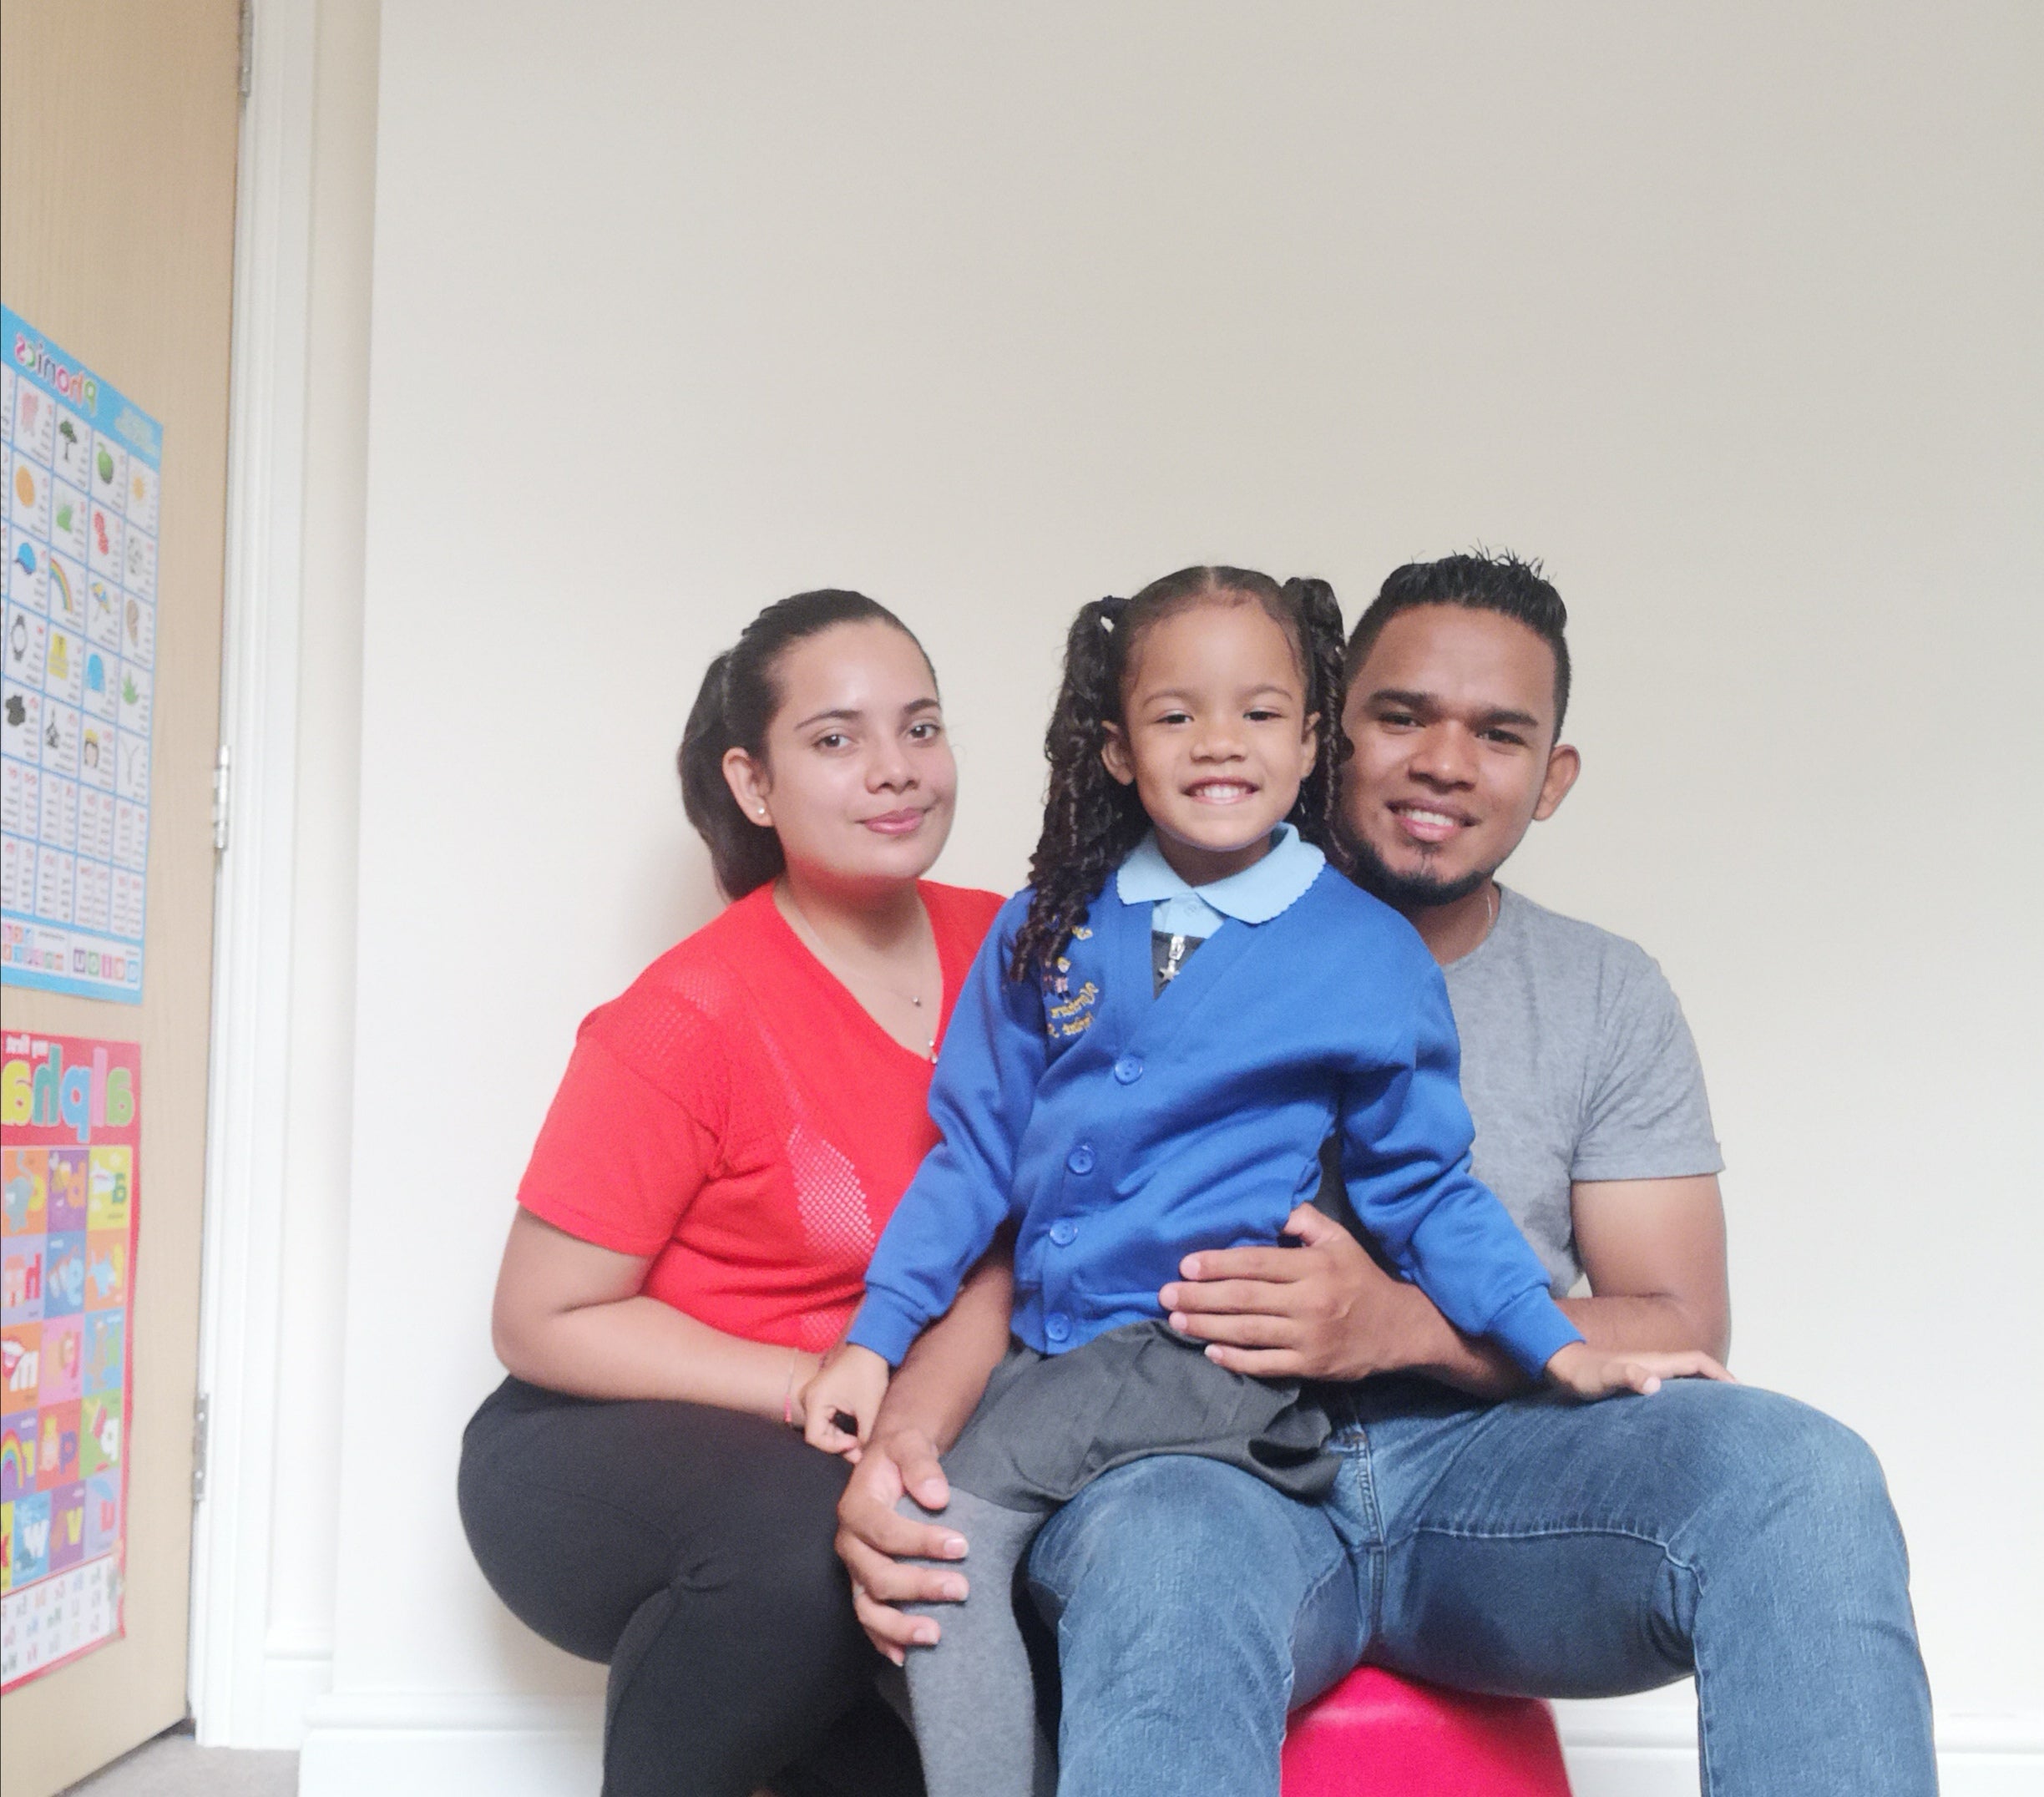 Asylum-seeking Honduran national Allan Cordona says his family has lived in poverty for nearly three years due to Home Office policy preventing him working